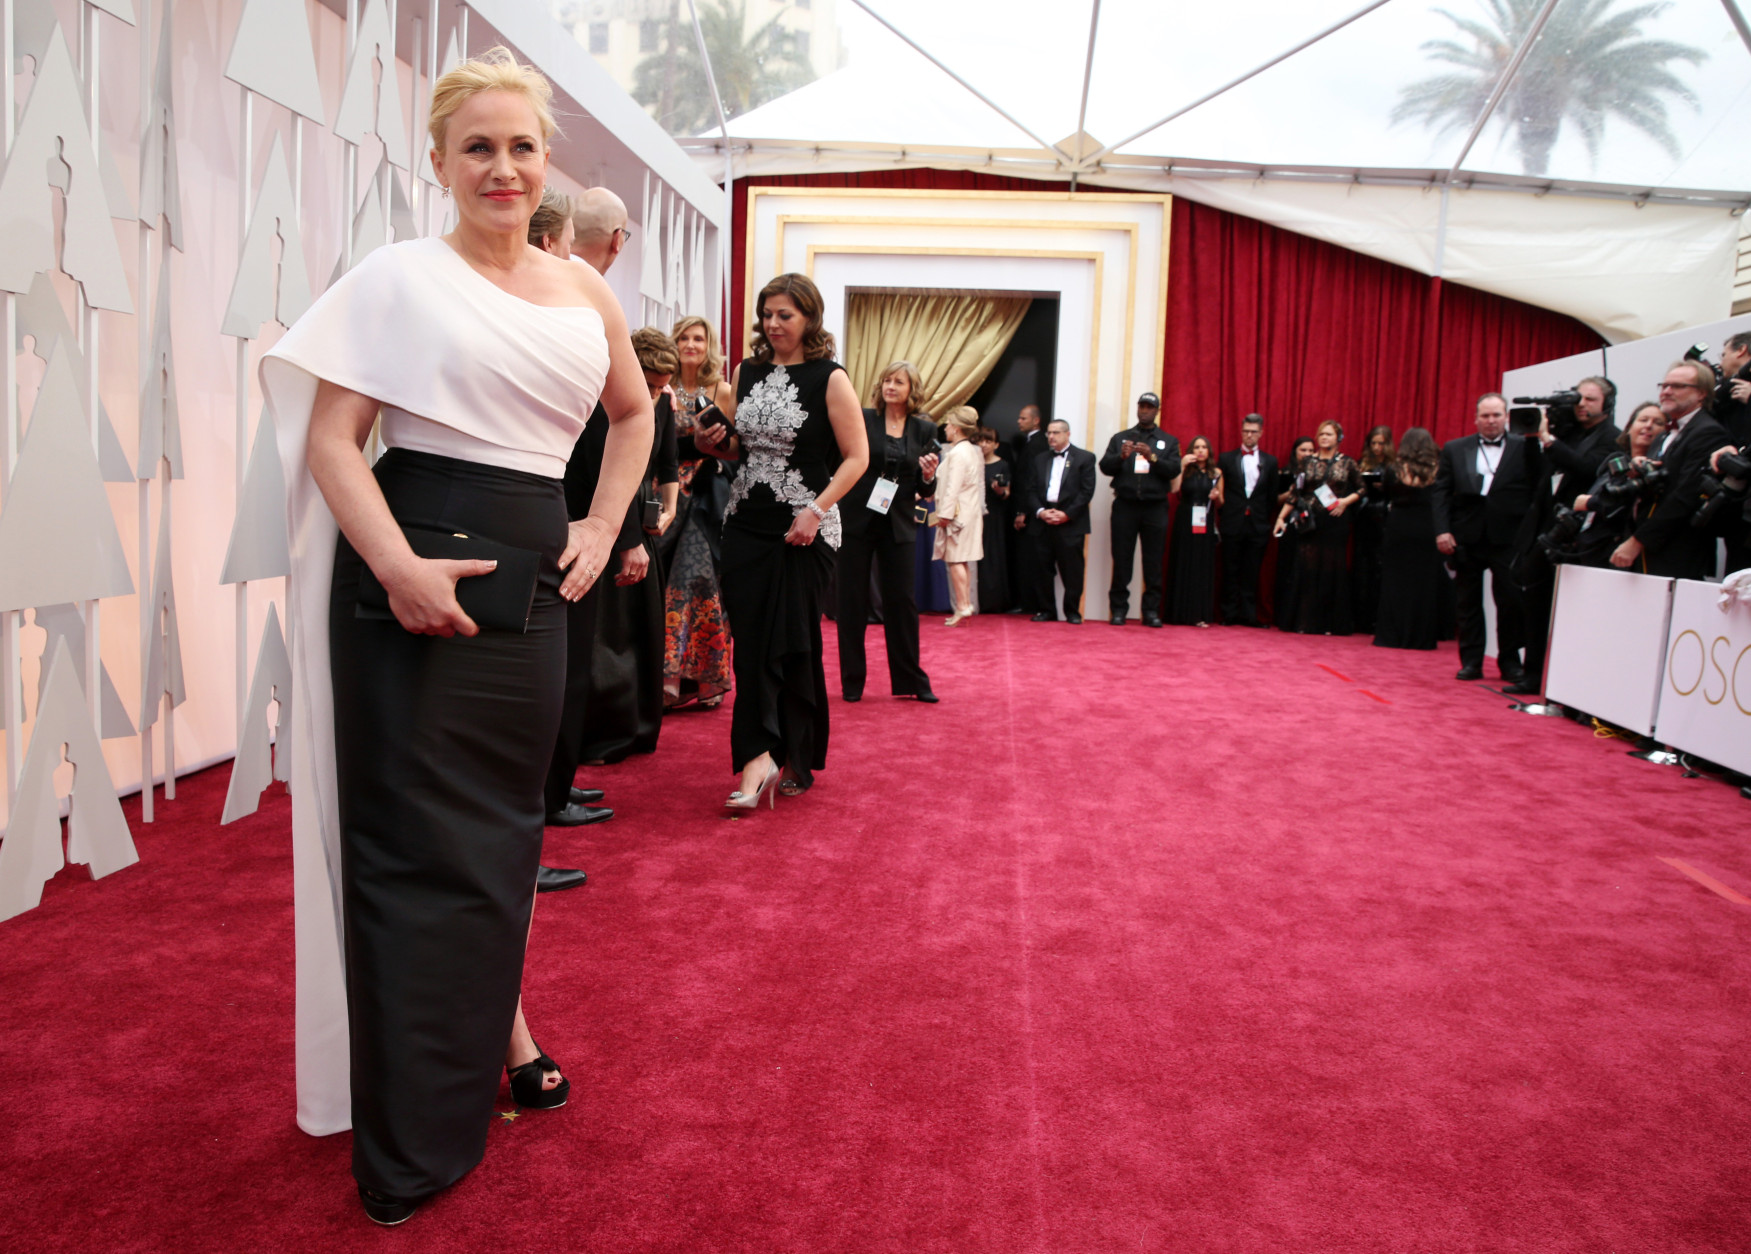 Patricia Arquette arrives at the Oscars on Sunday, Feb. 22, 2015, at the Dolby Theatre in Los Angeles. (Photo by Matt Sayles/Invision/AP)